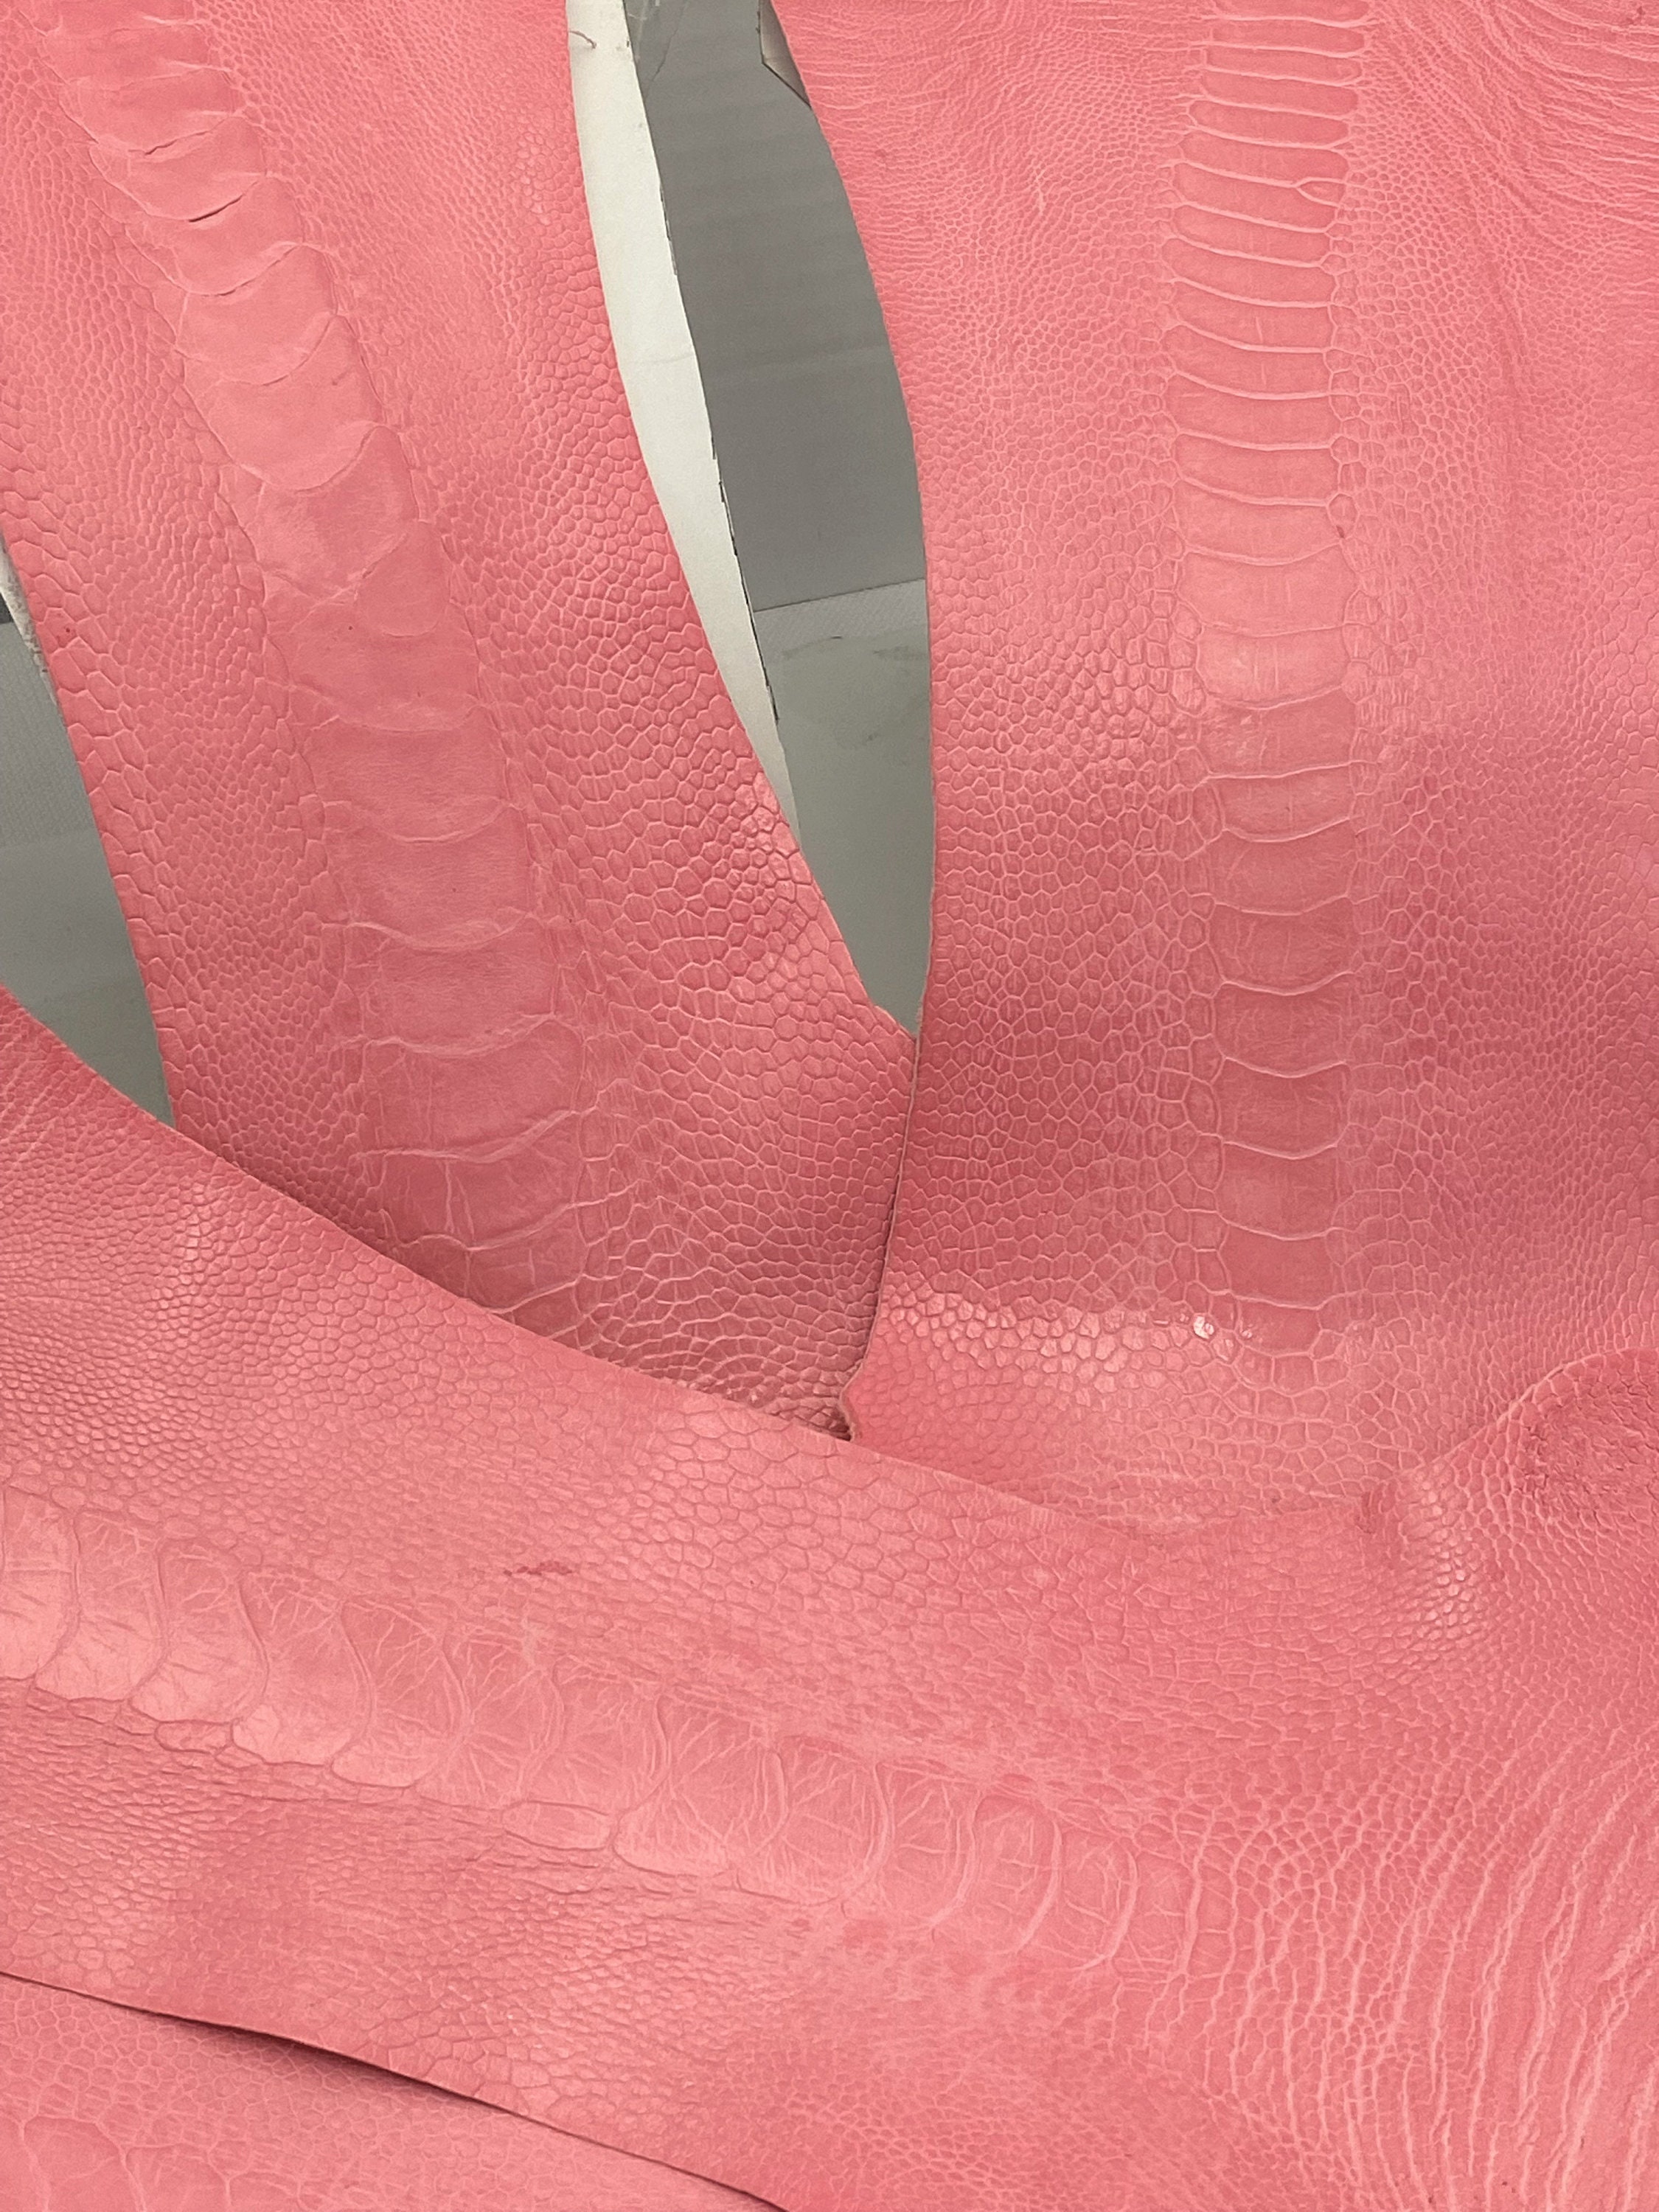 Ostrich leg leather pink - Exotic Leathers Europe